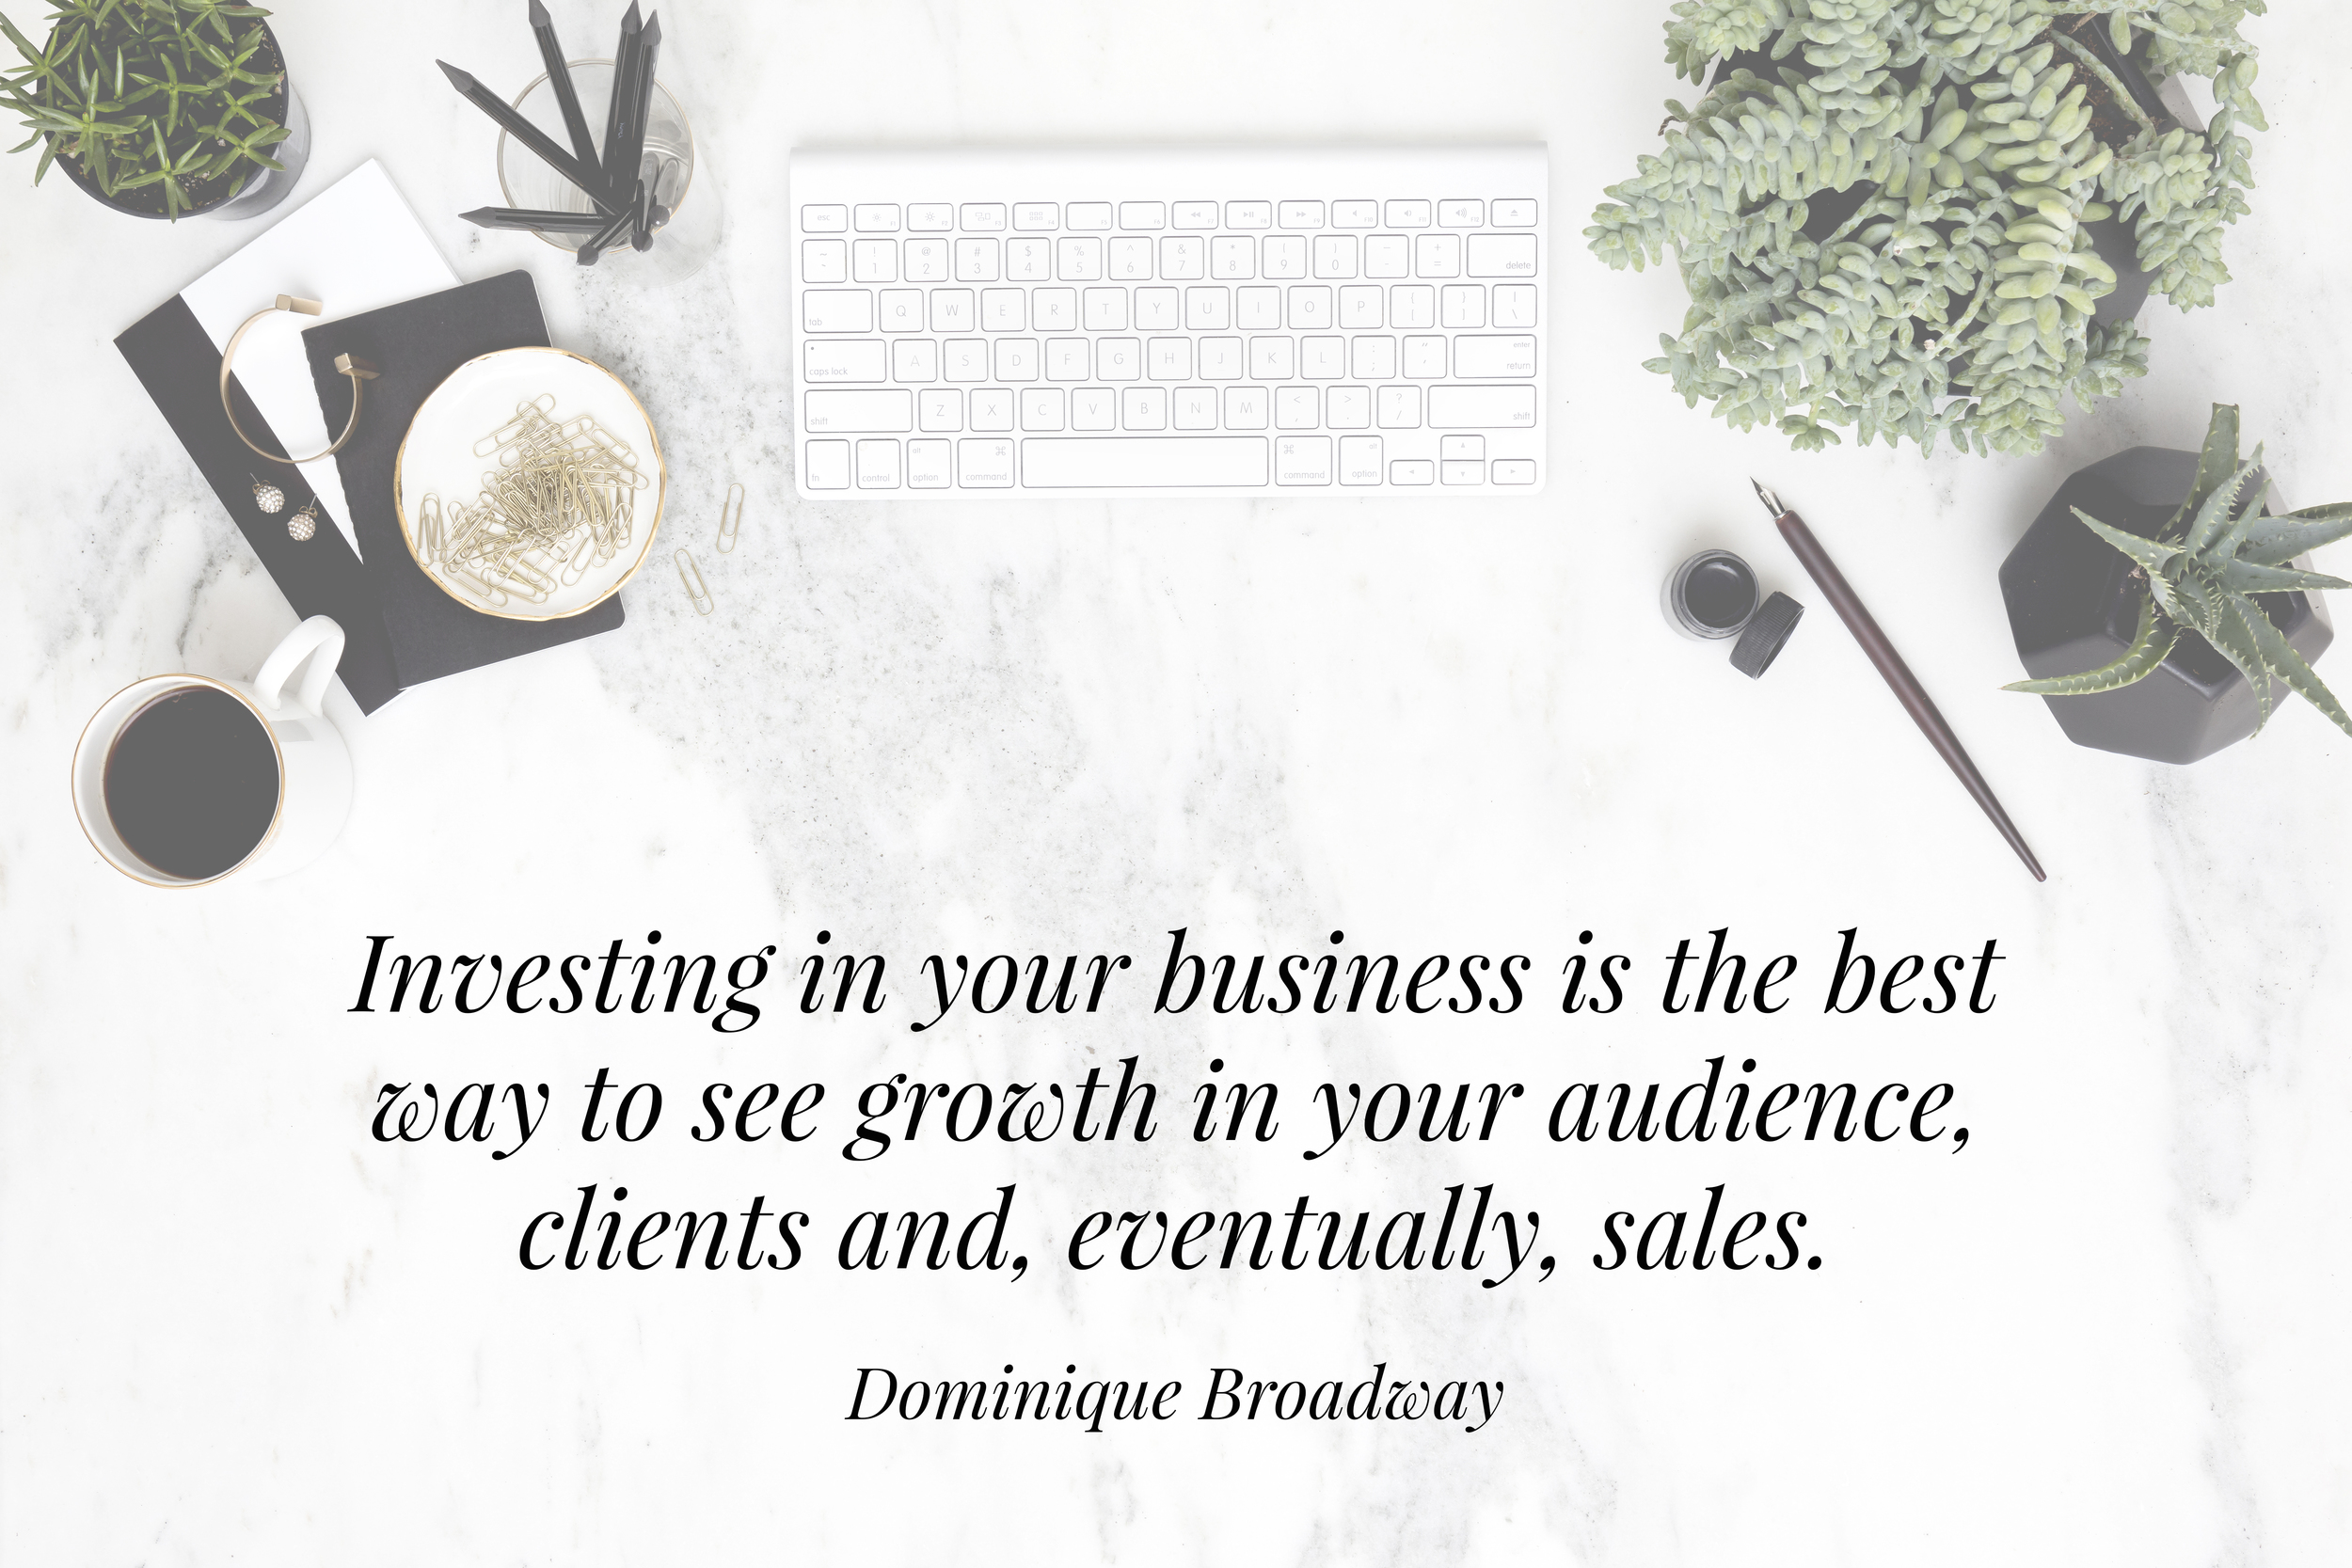   Dominique Broadway  | The Importance of Investing in Your Business | The School of Styling -  theschoolofstyling.com  | Creative Business Crash Course 